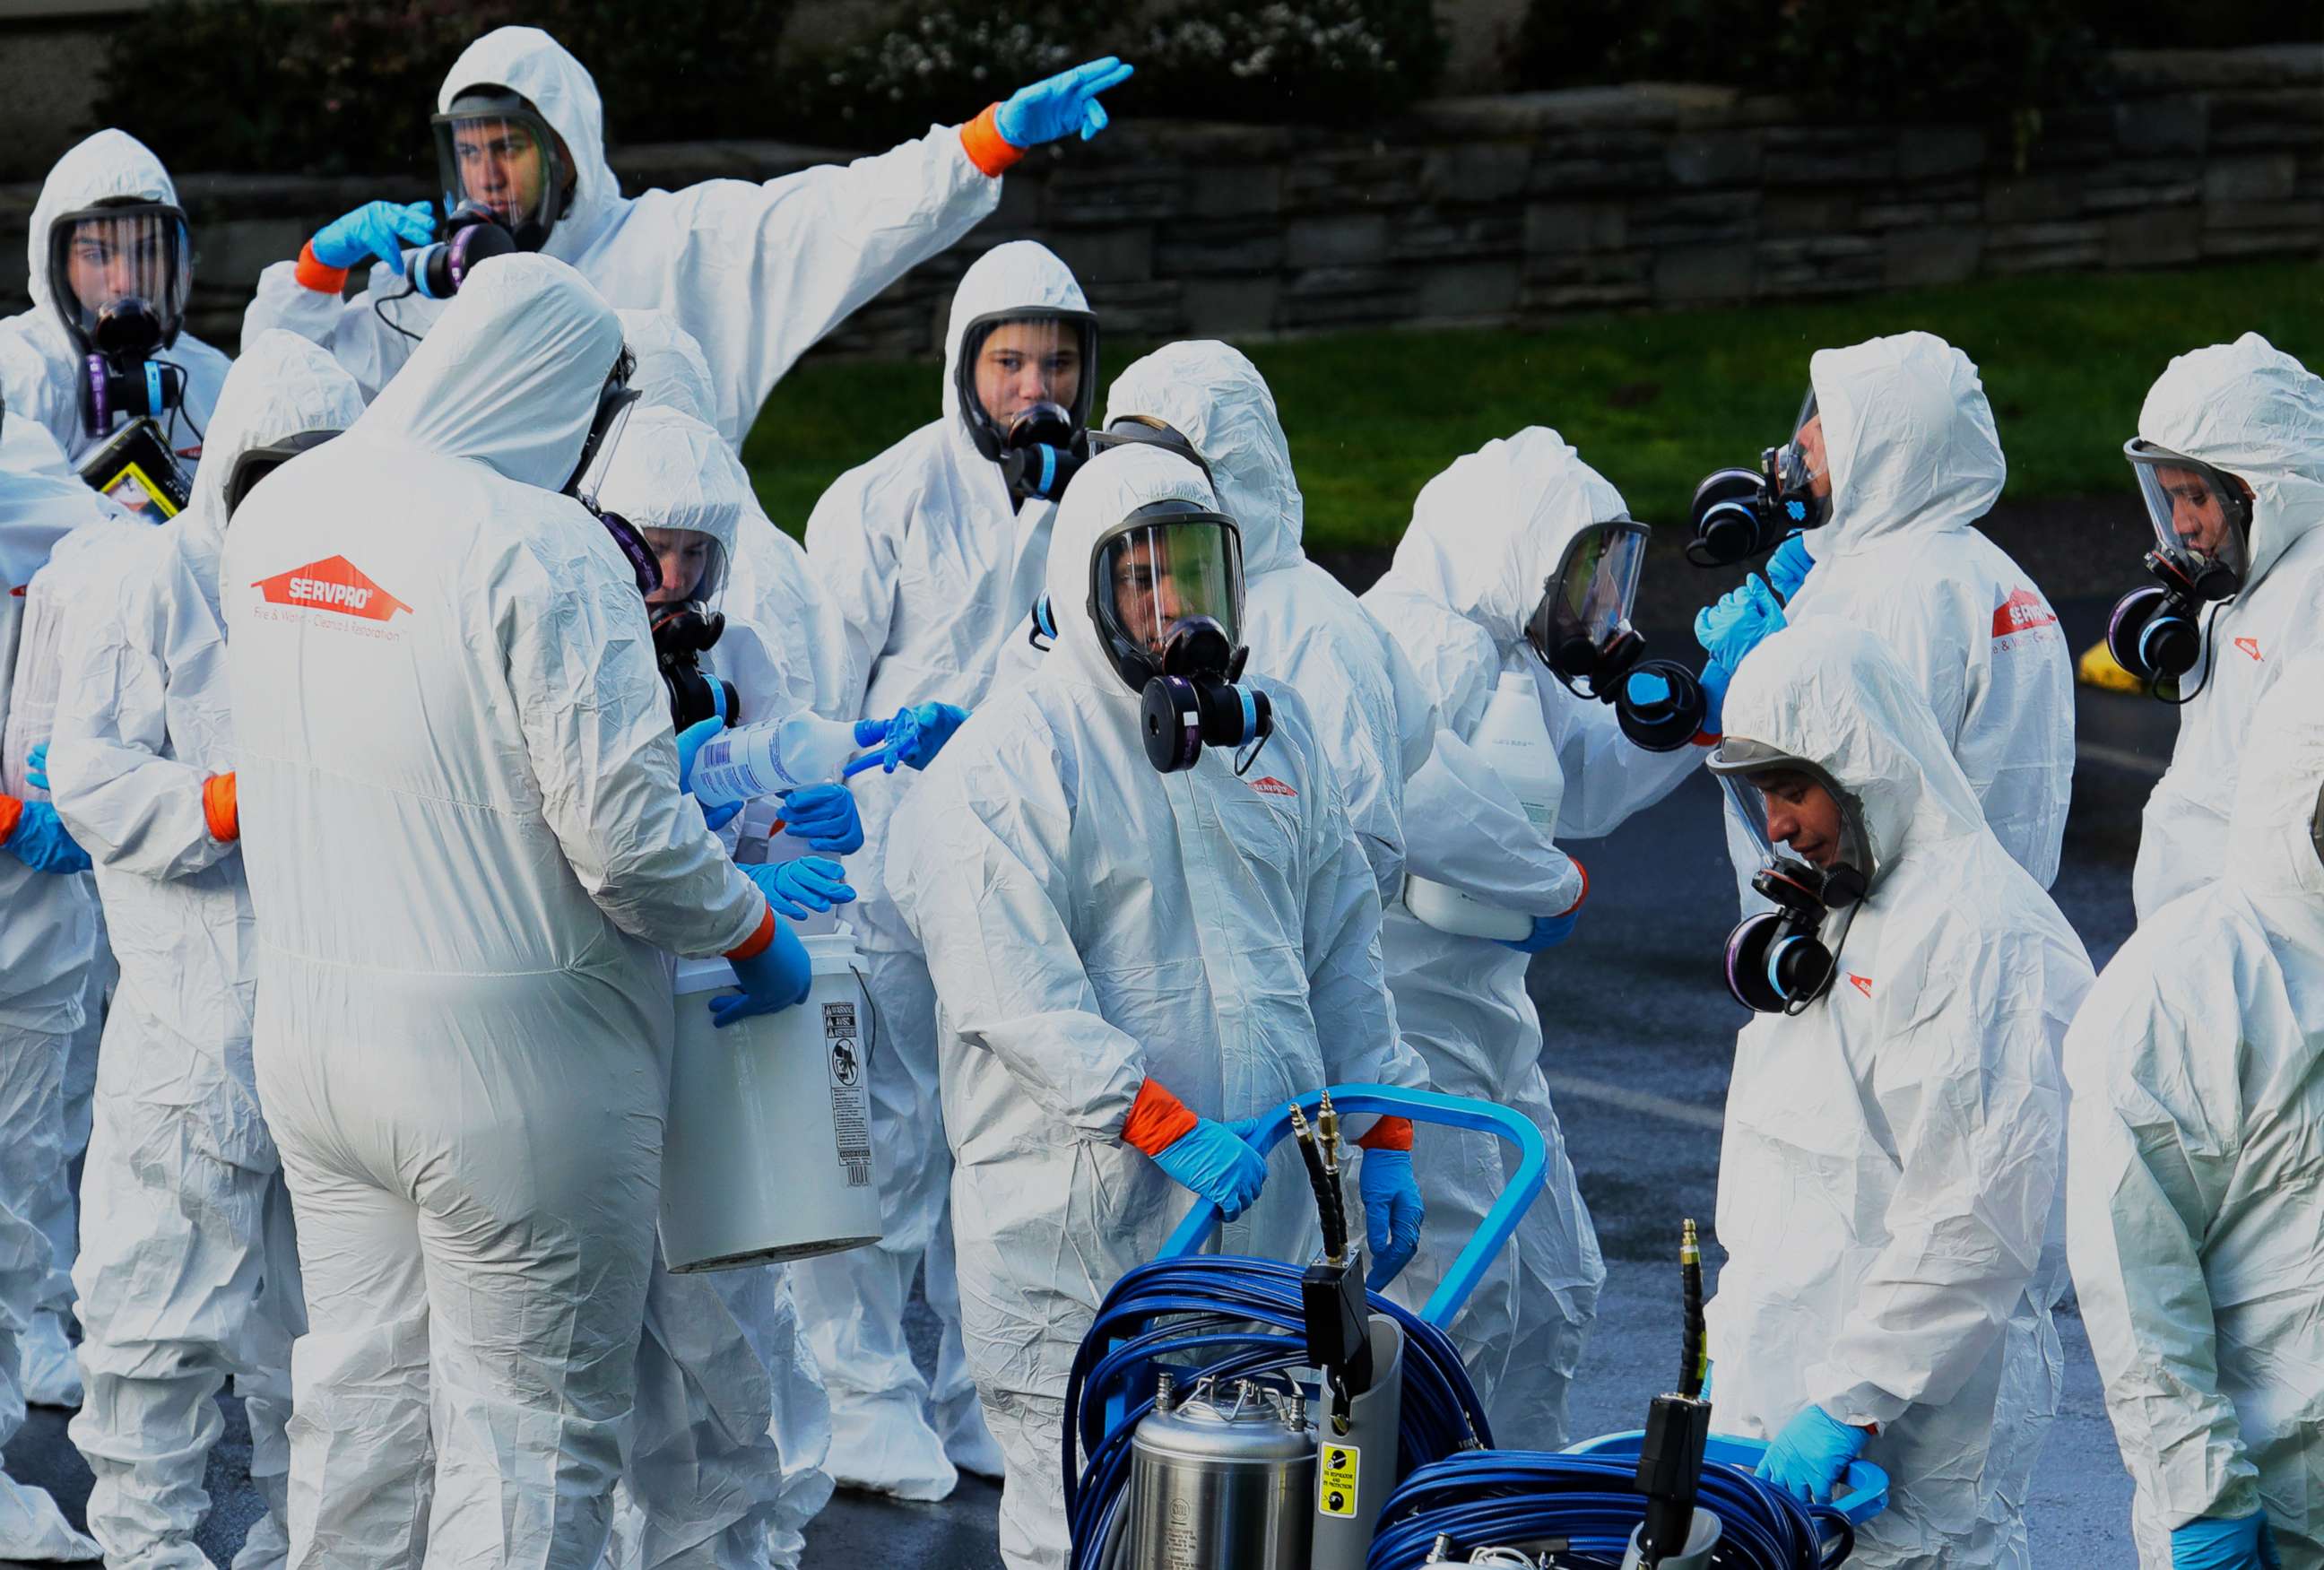 PHOTO: Workers from a Servpro disaster recovery team wearing protective suits and respirators enter the Life Care Center in Kirkland, Wash., to begin cleaning and disinfecting the facility, March 11, 2020, near Seattle.